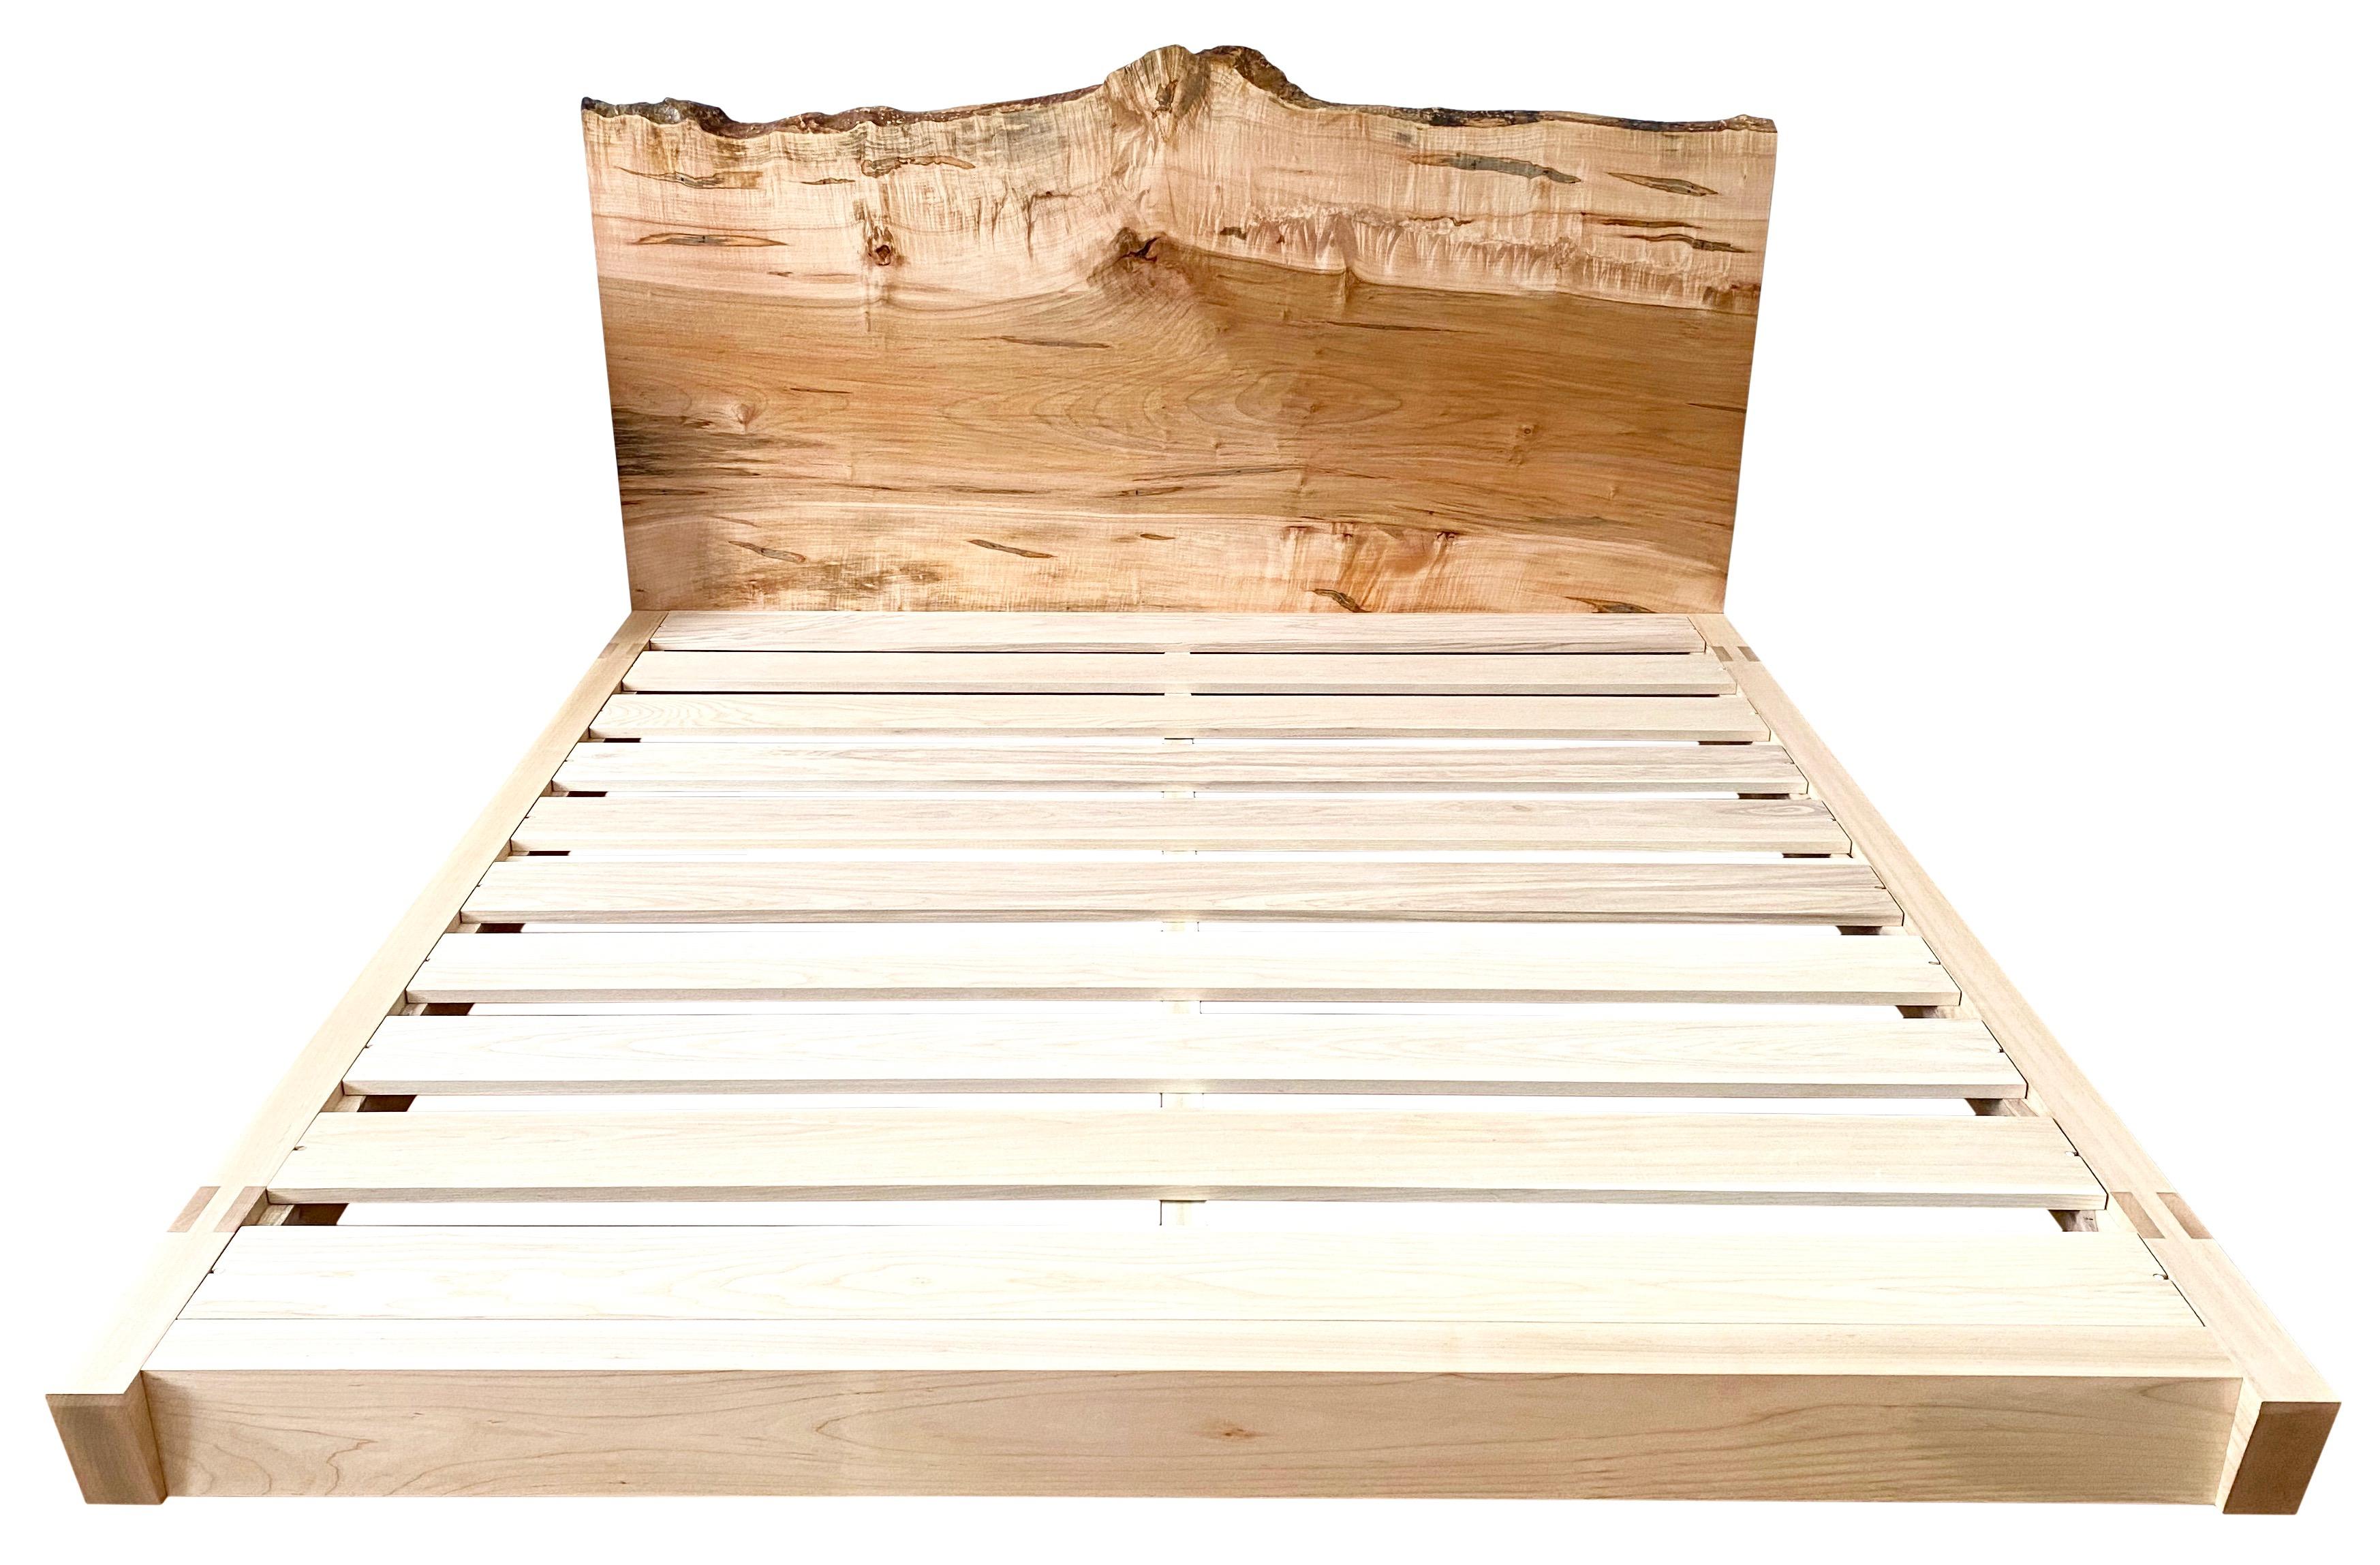 New York Heartwoods' king sized maple Perri Bed is inspired by the timeless elegance of Asian and Mid-Century Modern design. Each is handcrafted using traditional joinery techniques to create a frame that breaks down for easy transport and assembly.